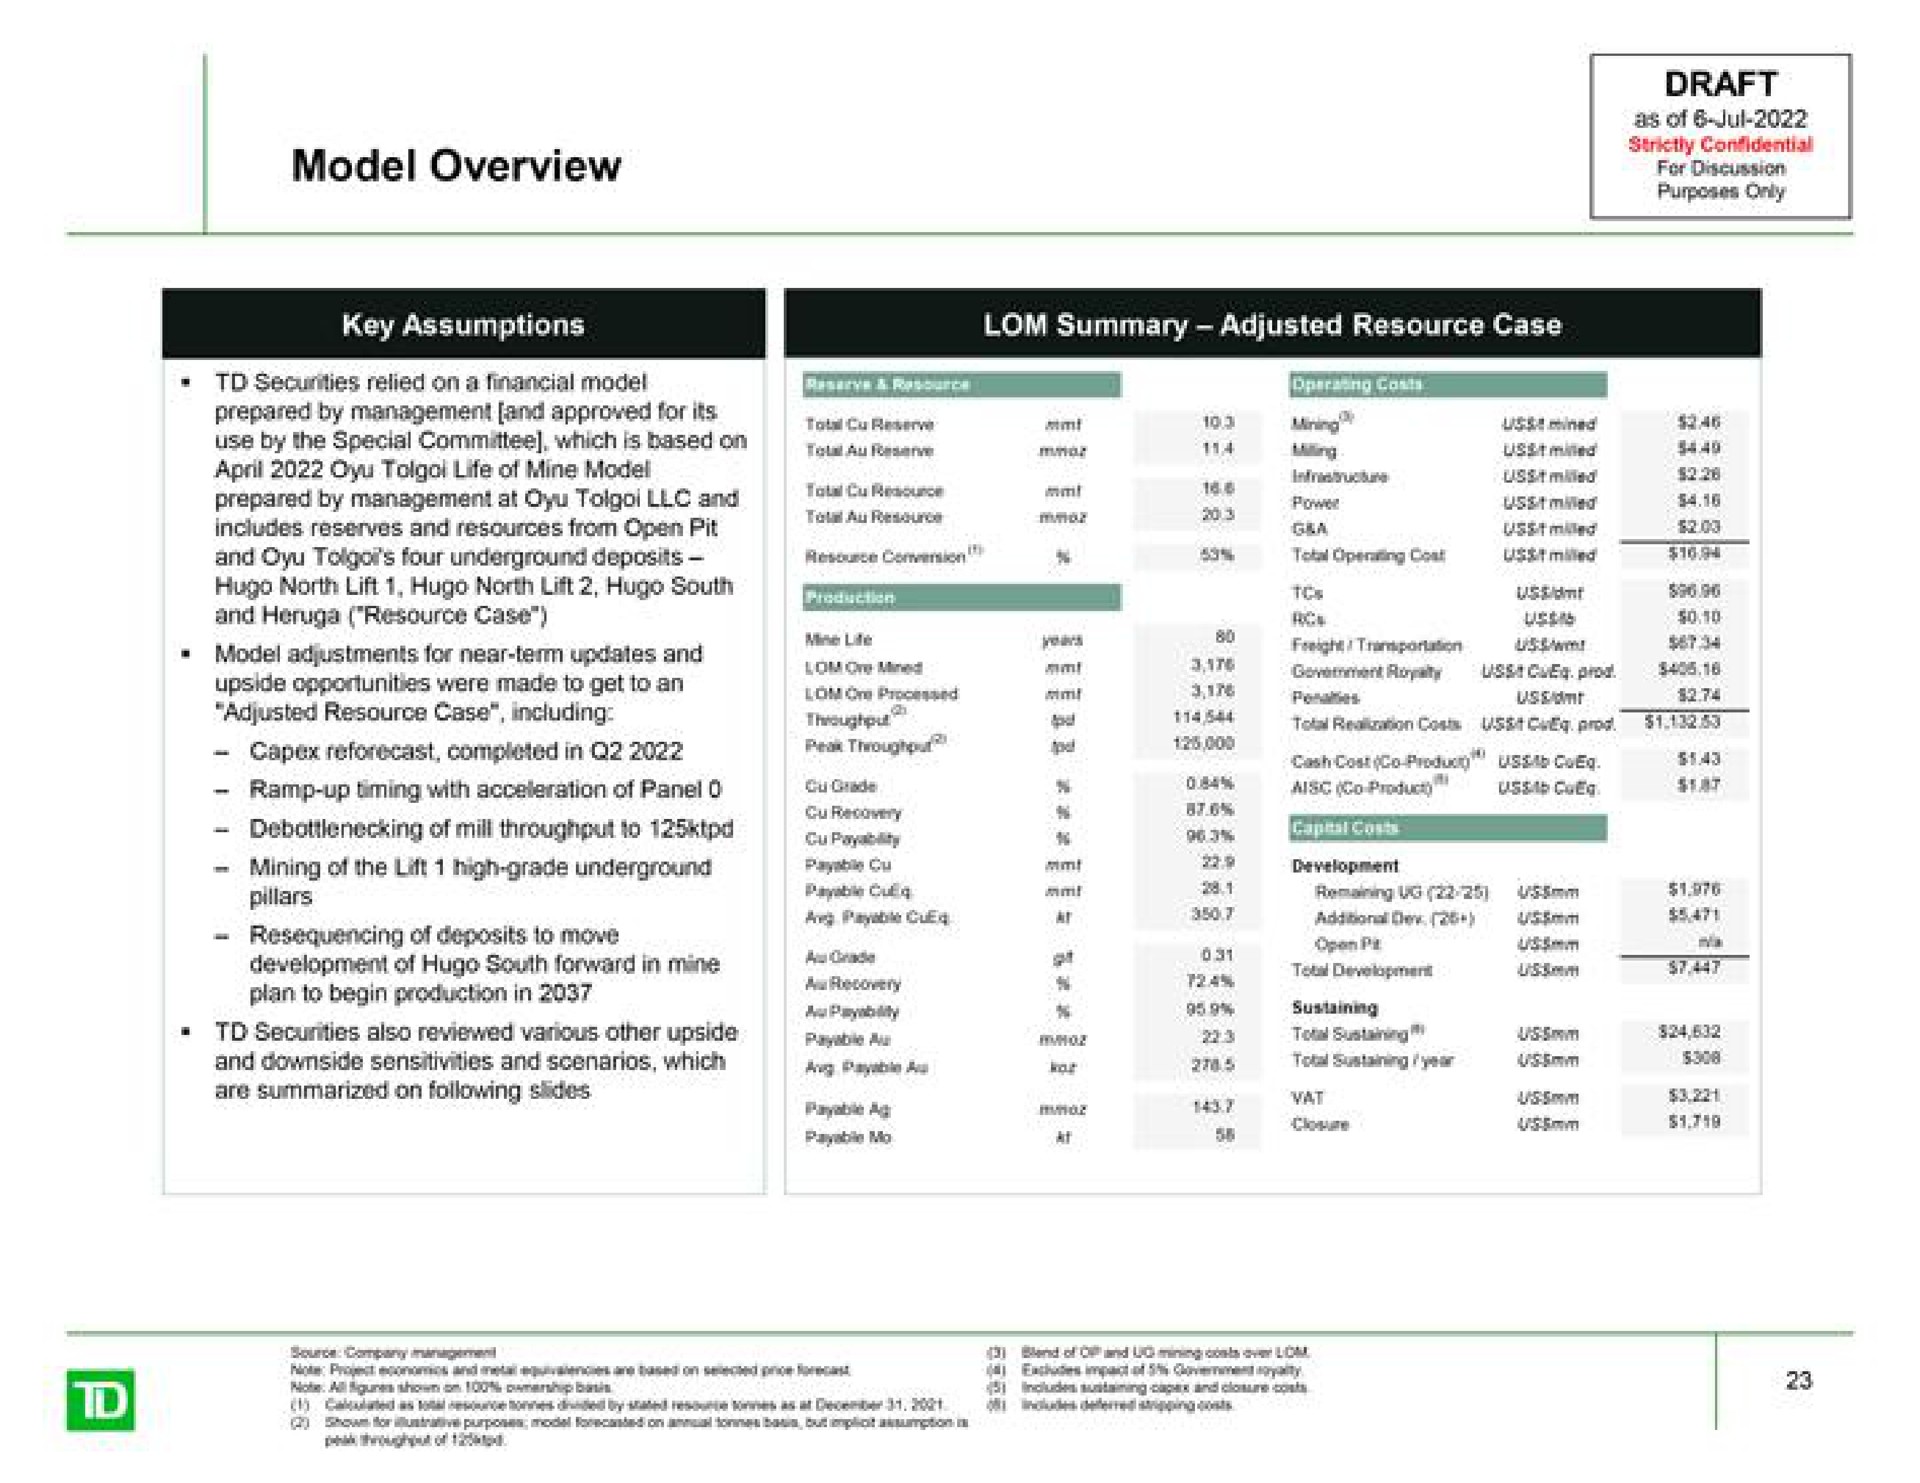 model overview draft as of securities relied on a financial model of mill throughput to reserve | TD Securities